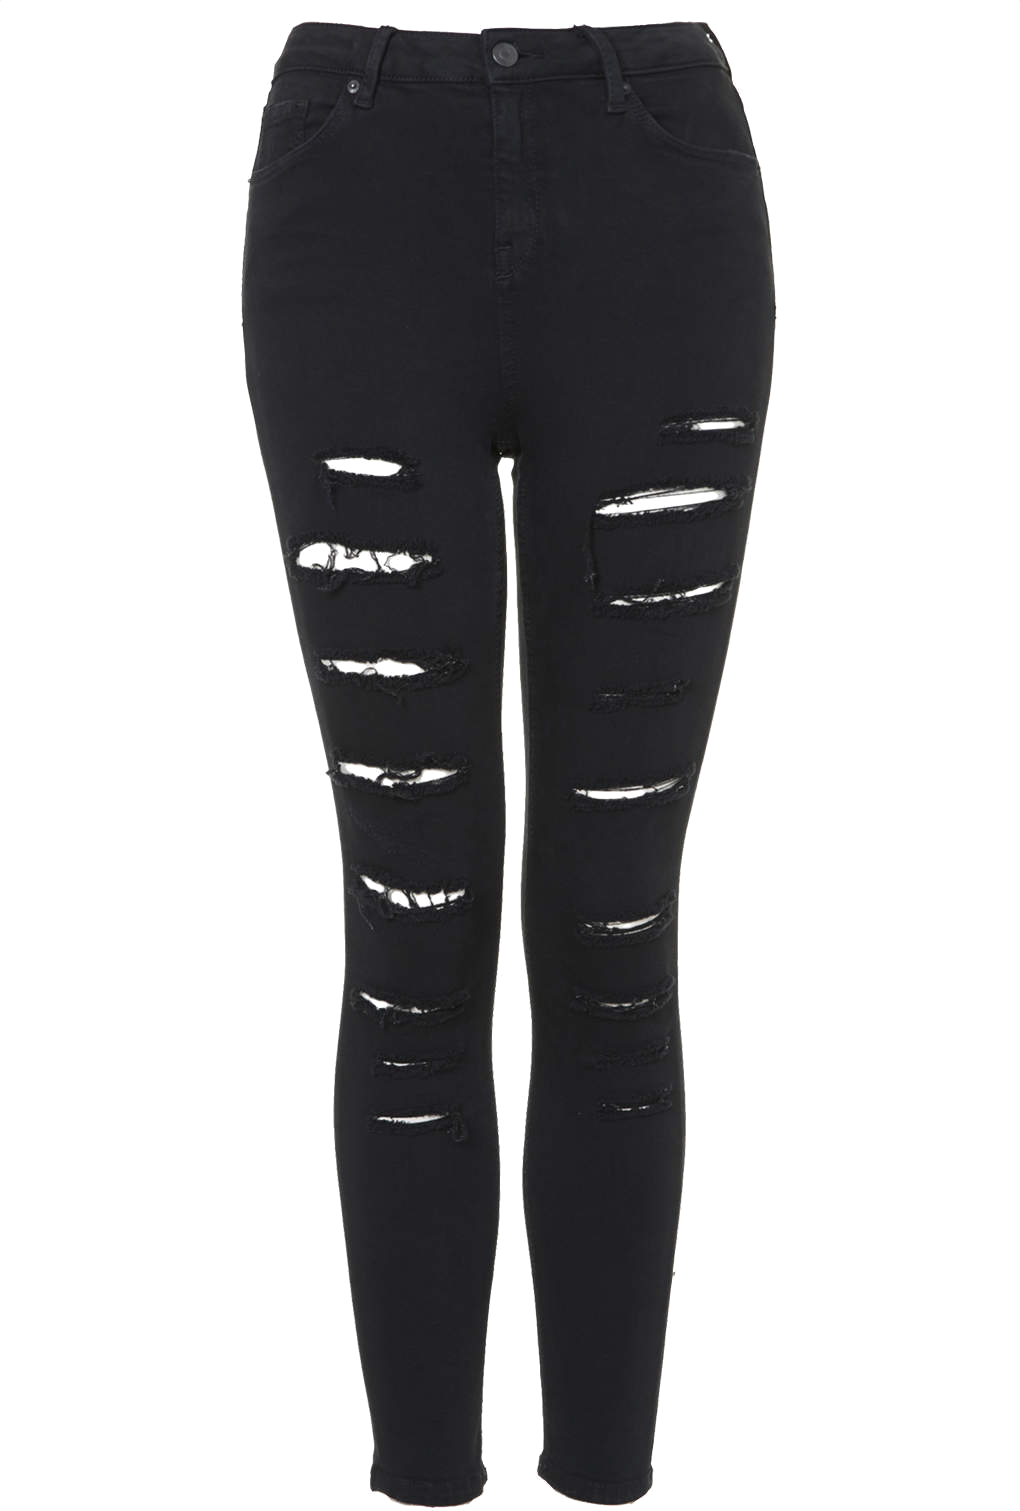 Jeans Topshop Leggings Trousers Download Free Image PNG Image